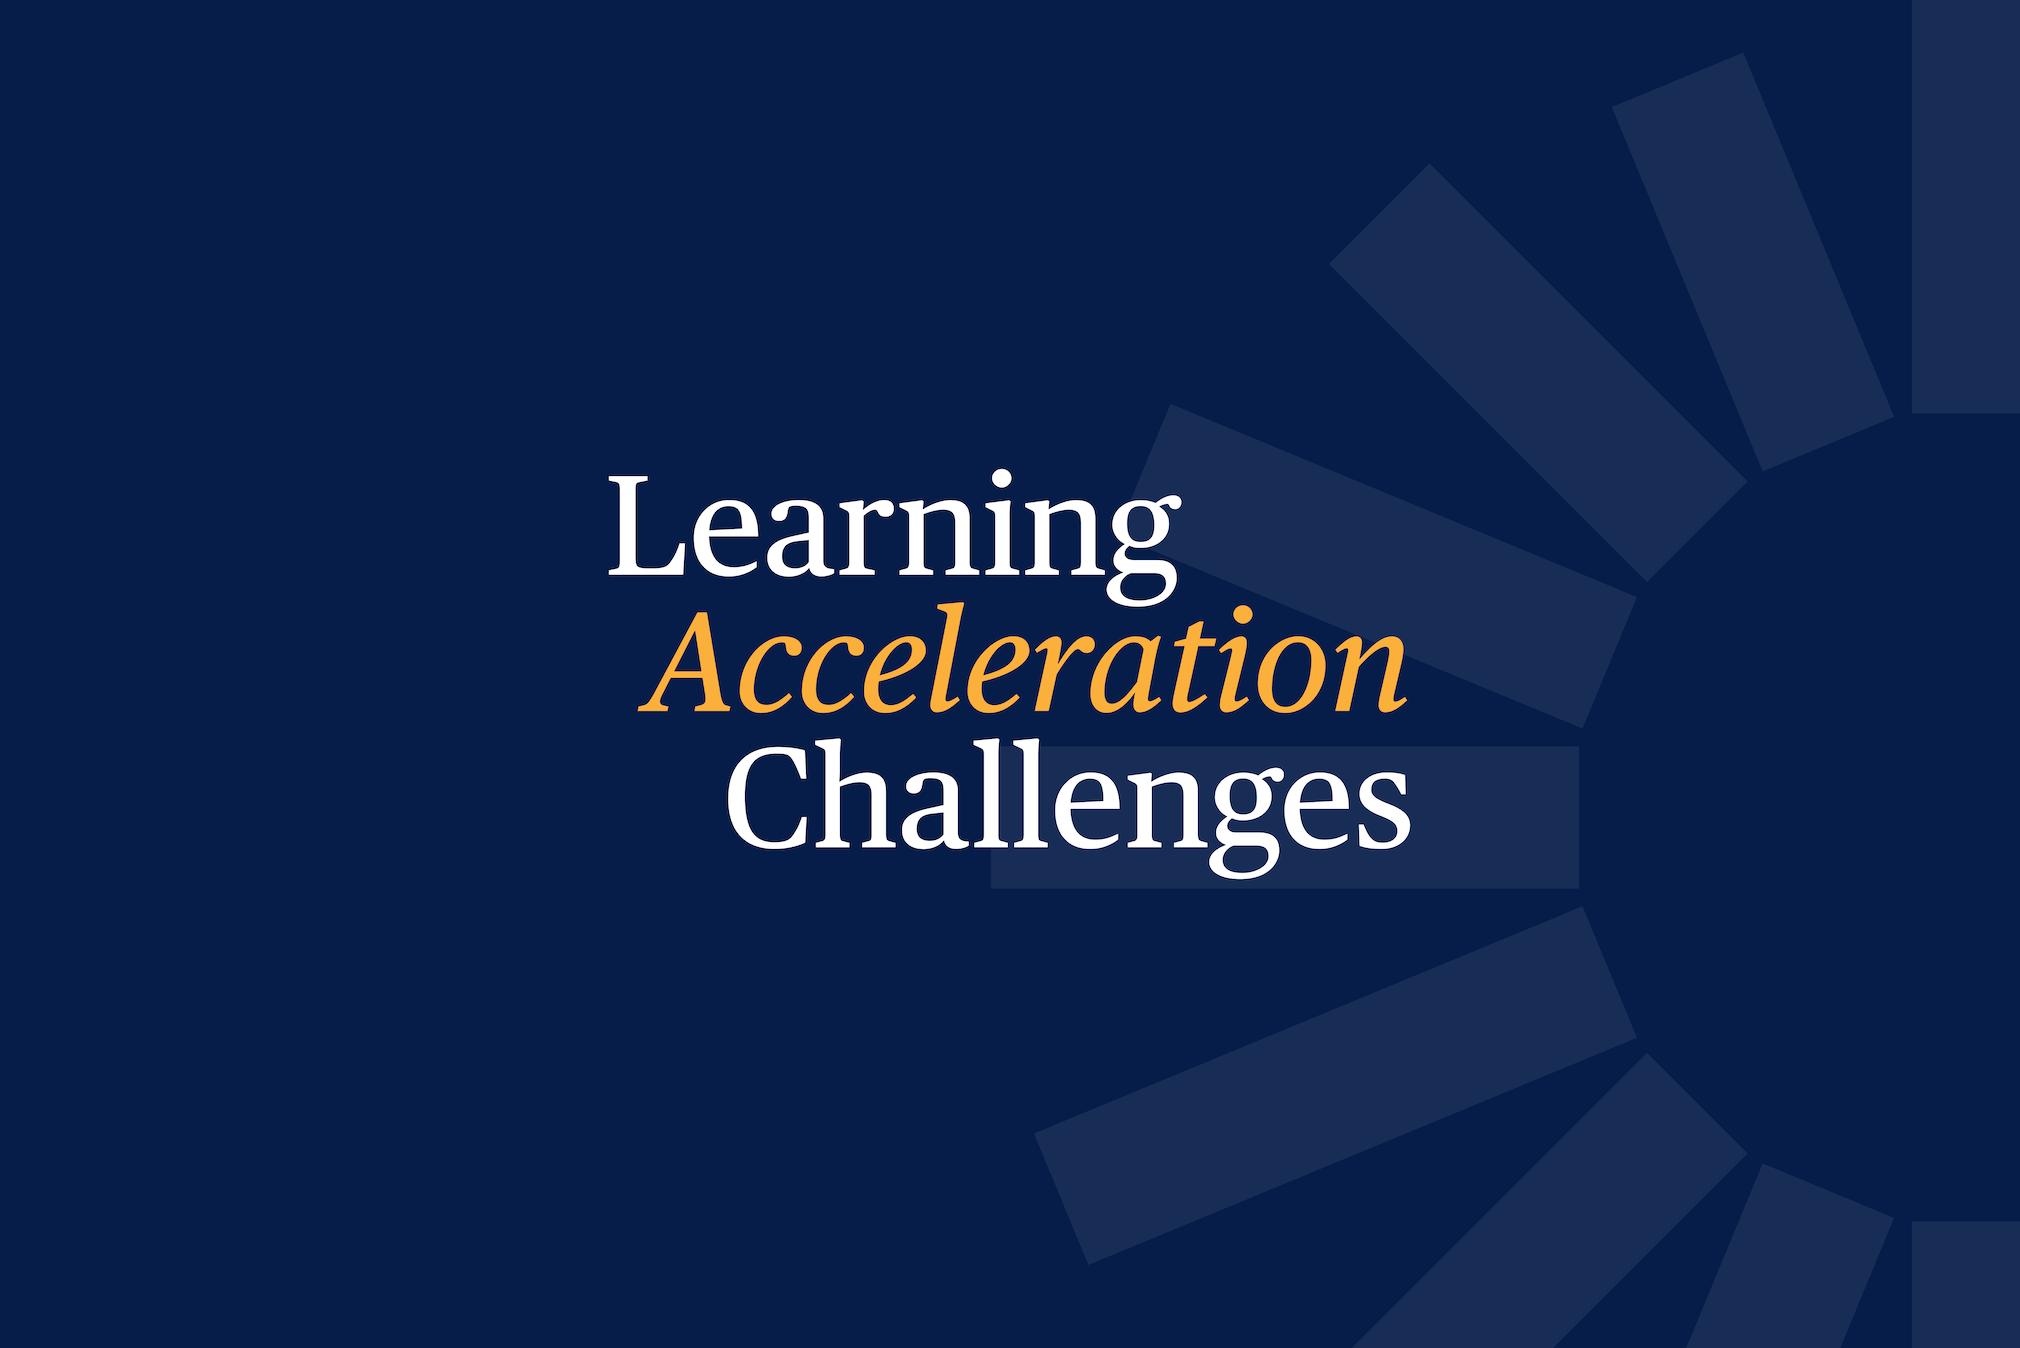 IES launches Learning Acceleration Challenges